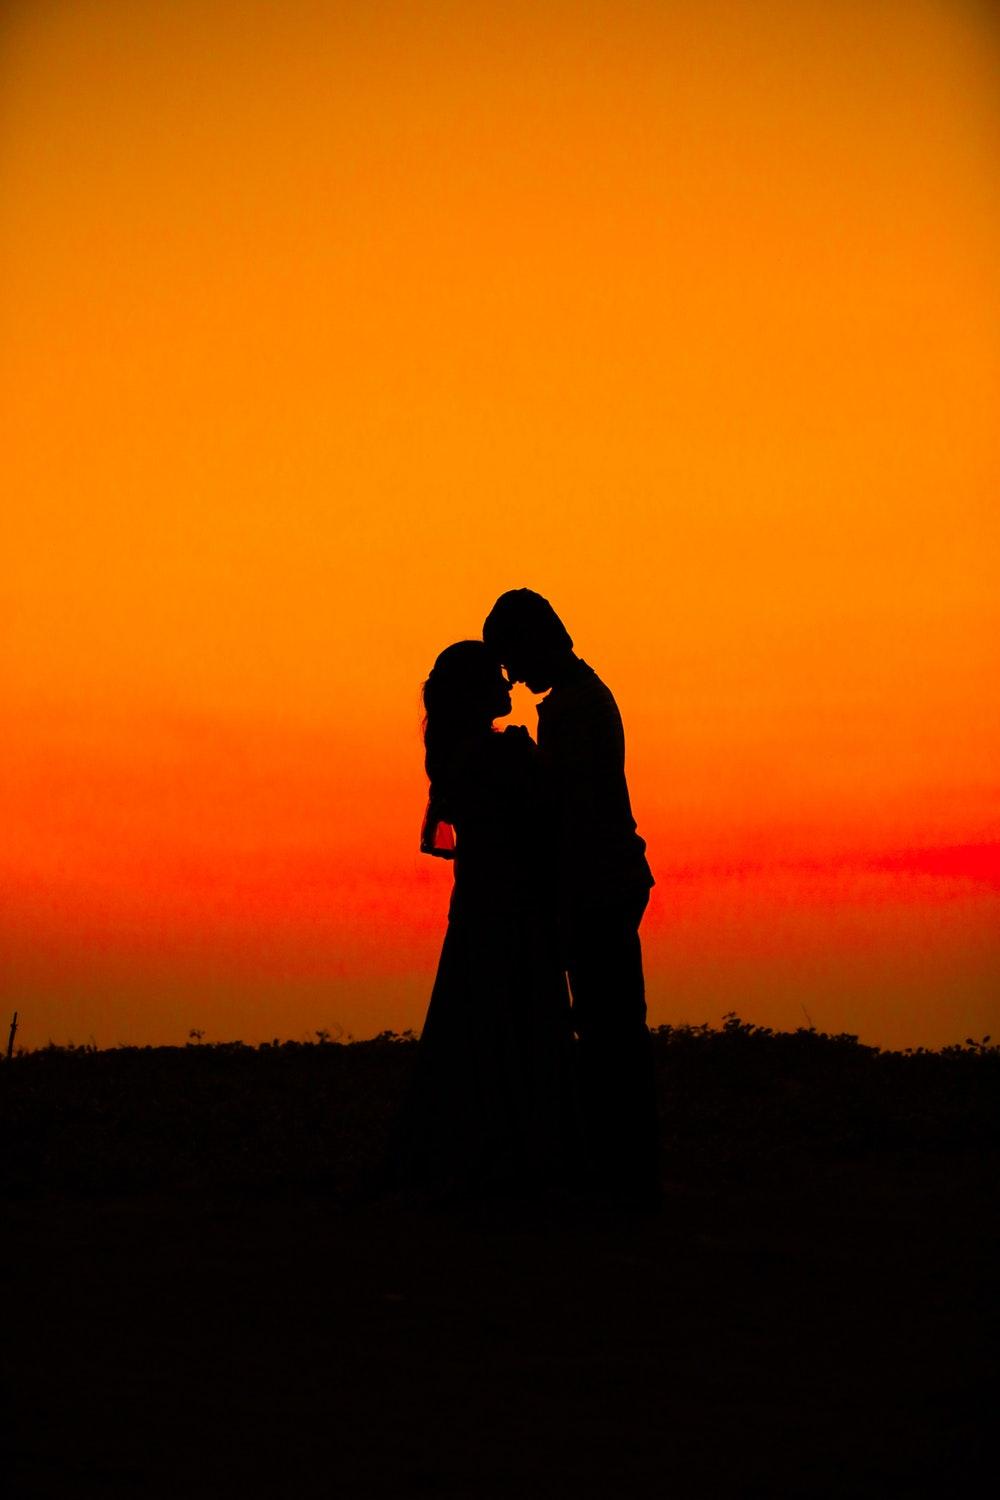 Romantic Kissing Couple Silhouette Wallpapers Wallpaper Cave